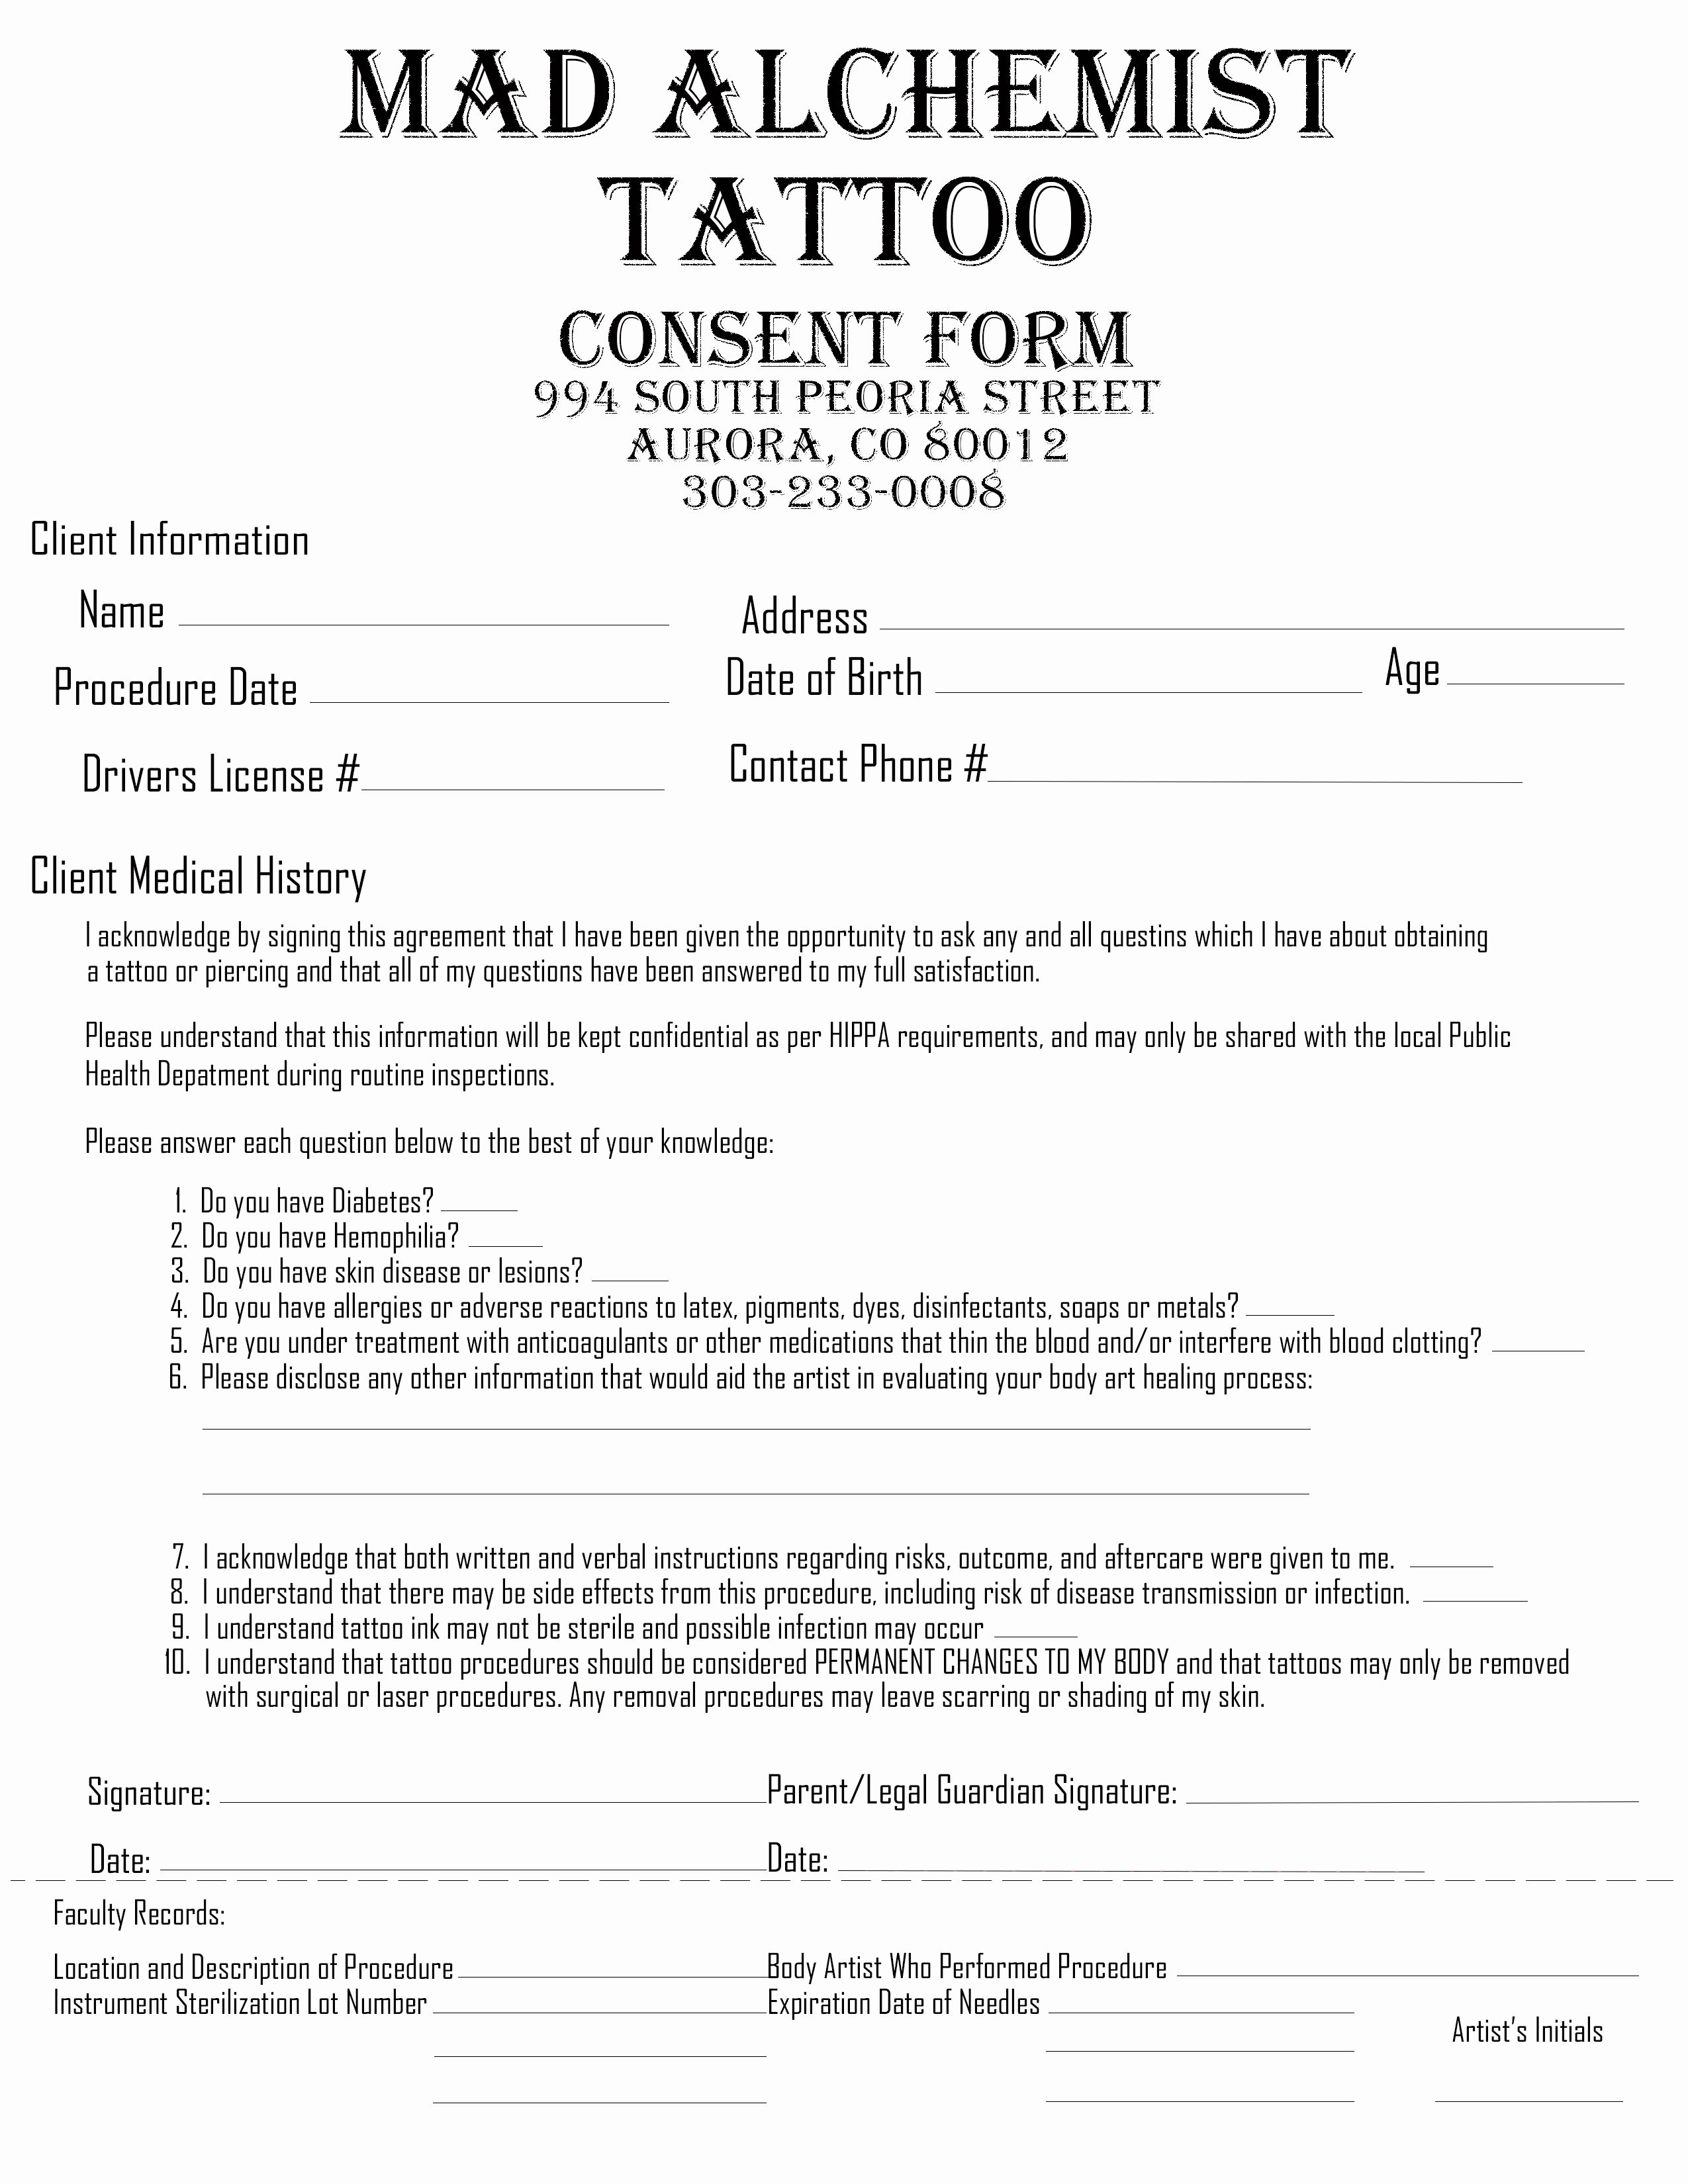 Tattoo Consent form Template Elegant Consent forms